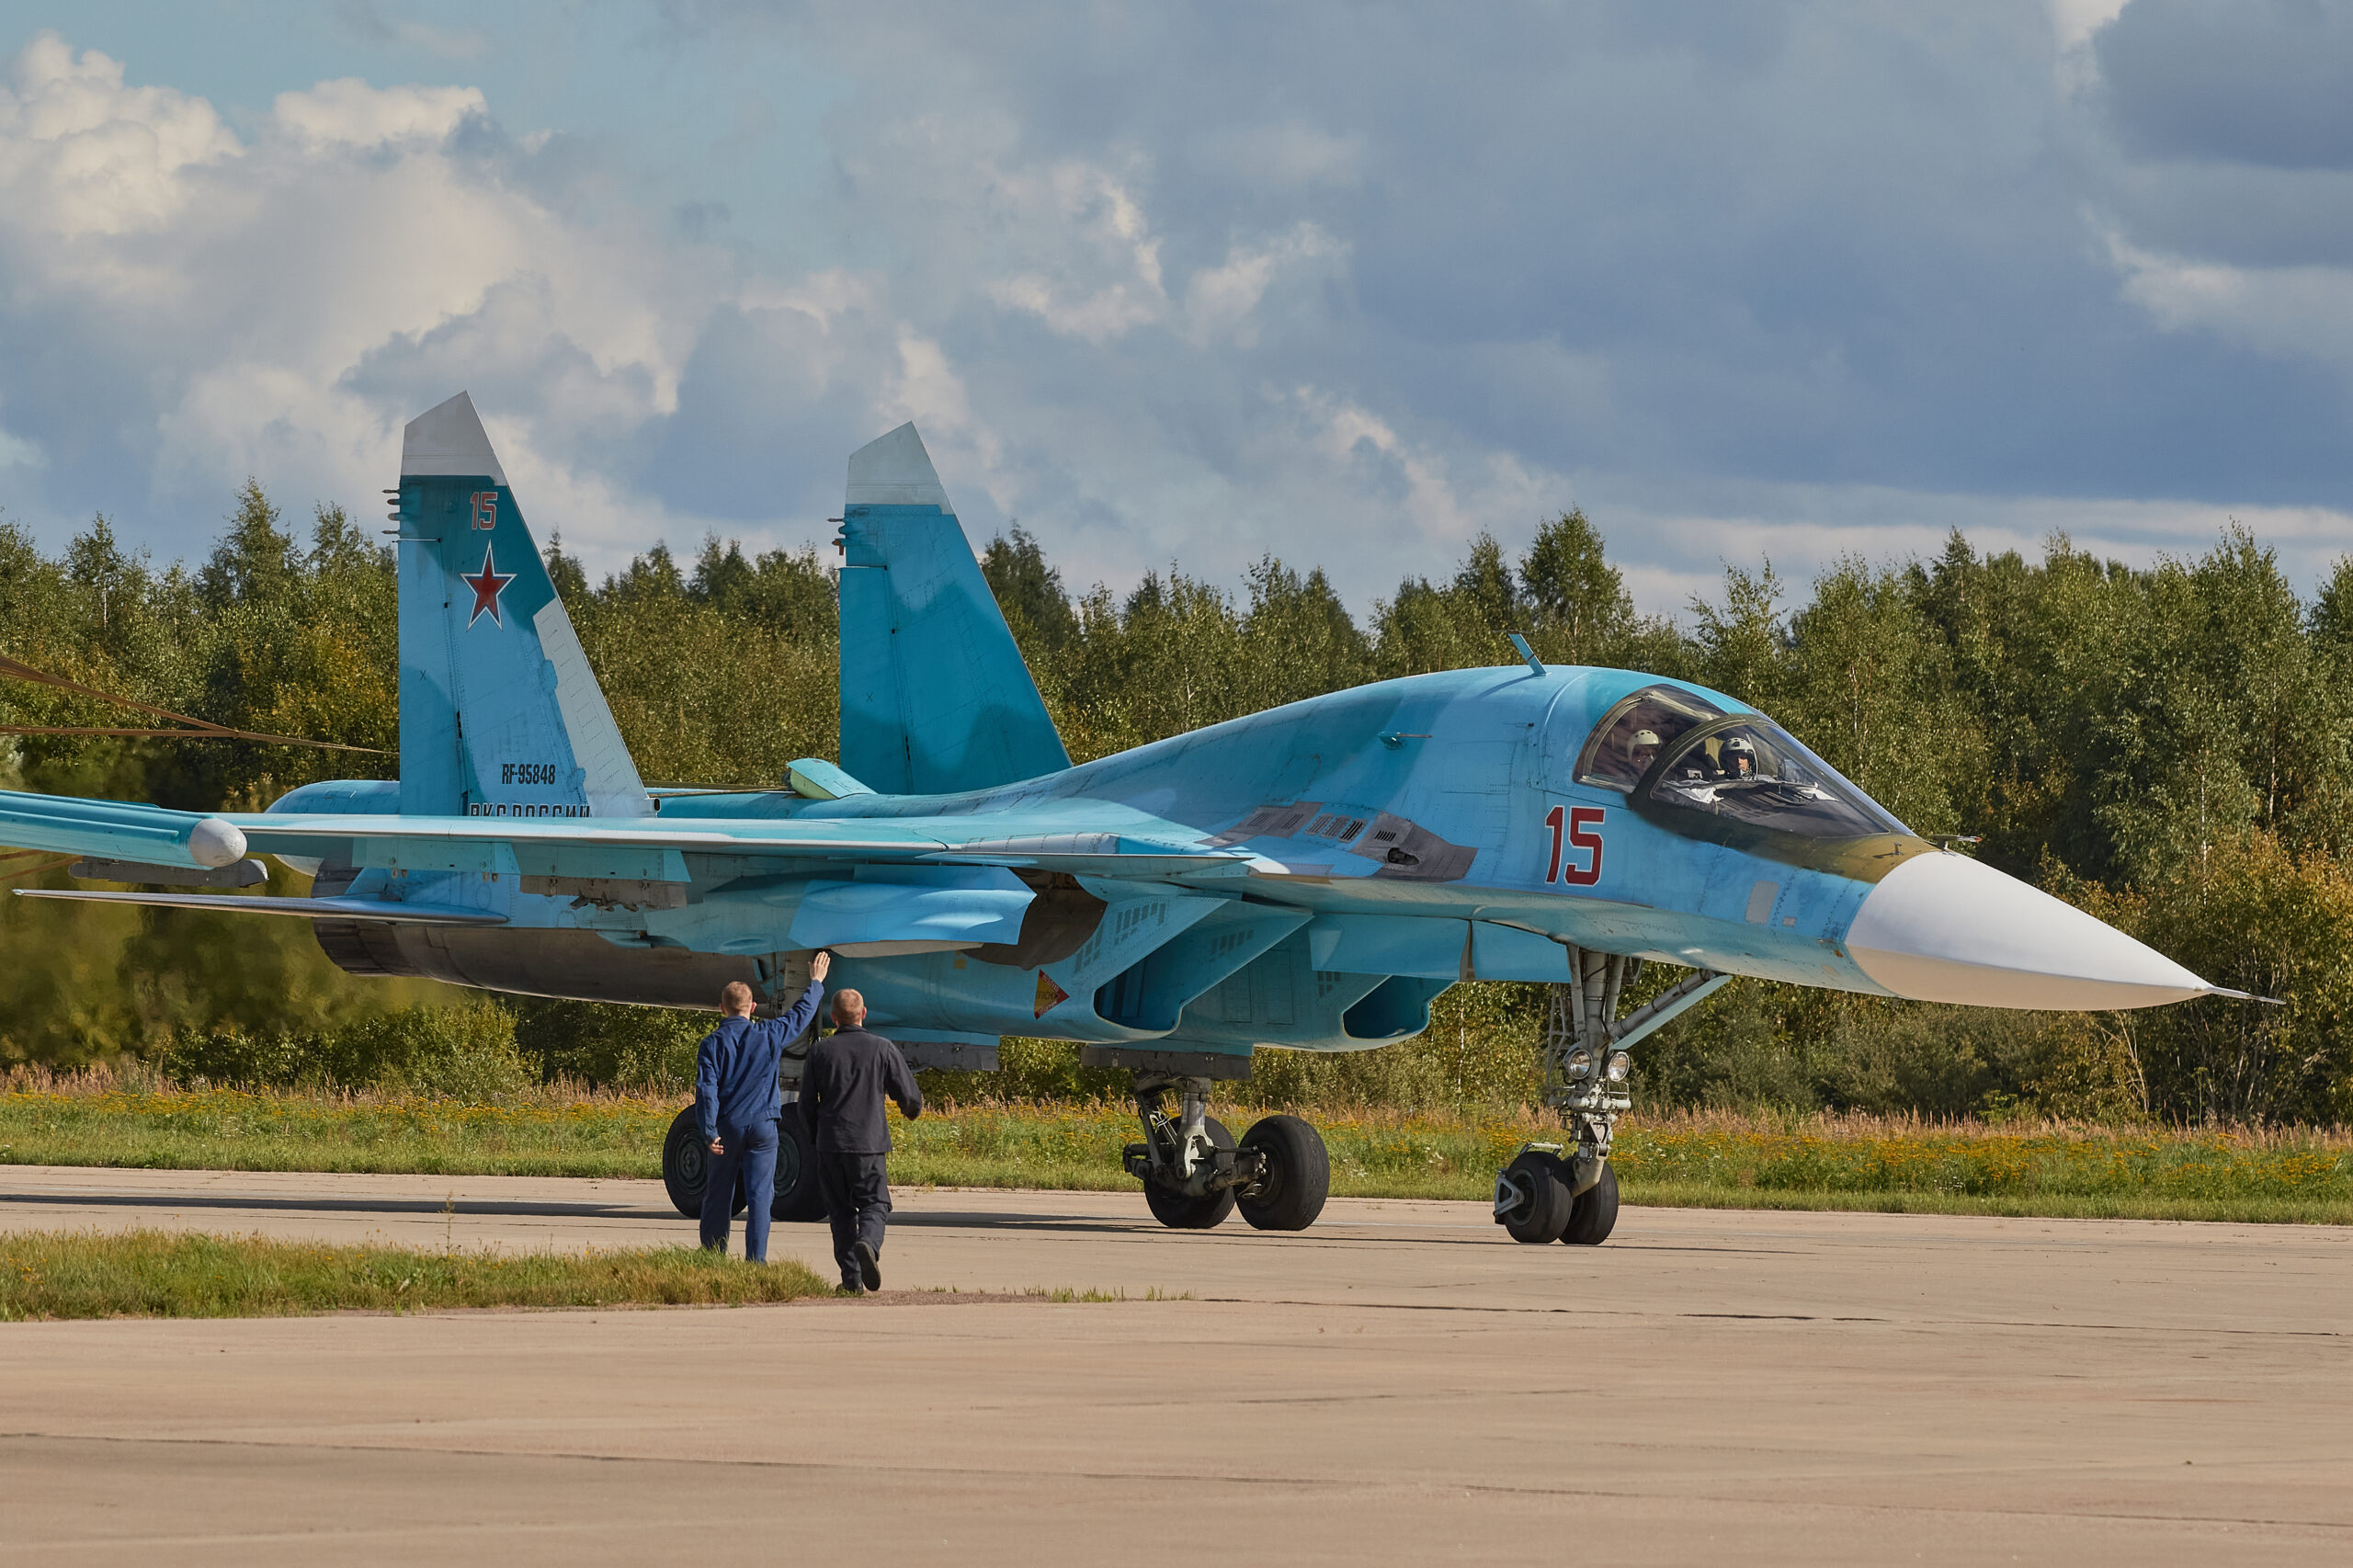 Ground crew greet a nuclear-capable Russian Aerospace Forces Su-34 Fullback strike aircraft on the runway. <em>Photo by Mihail Tokmakov/SOPA Images/LightRocket via Getty Images</em>